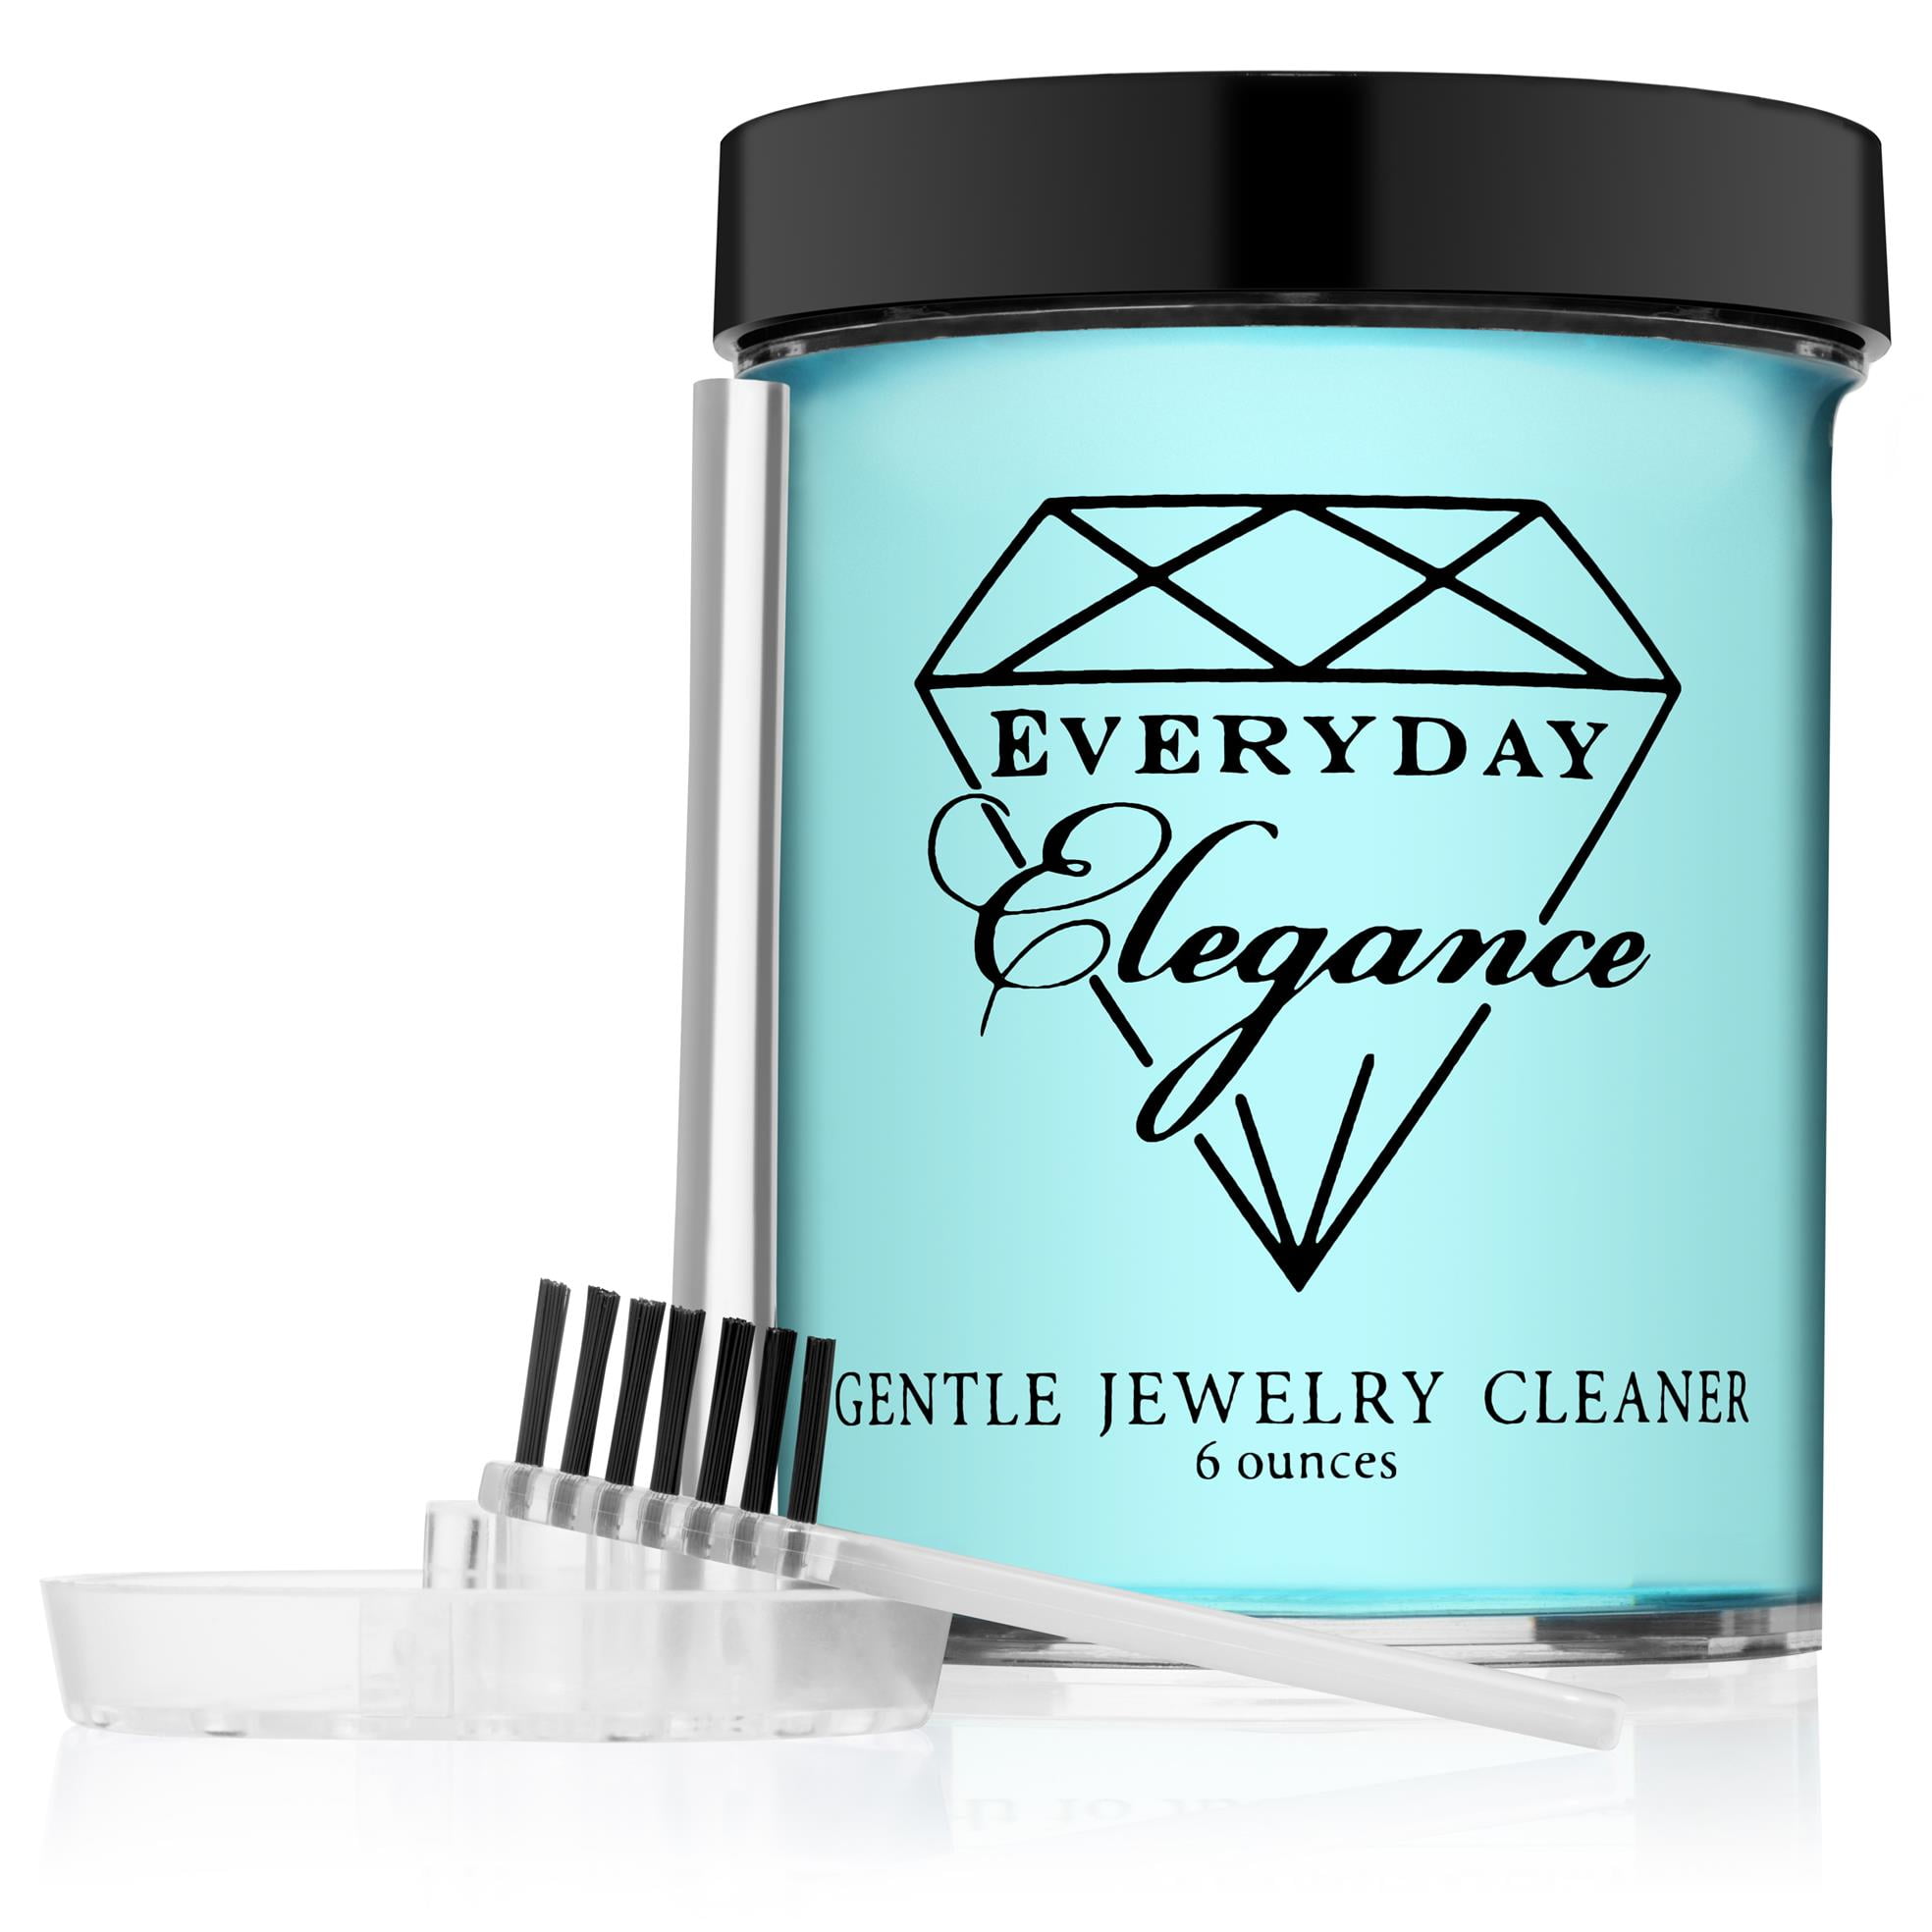 Buy Specially Formulated, Custom Gentle Jewelry Cleaning Kit at